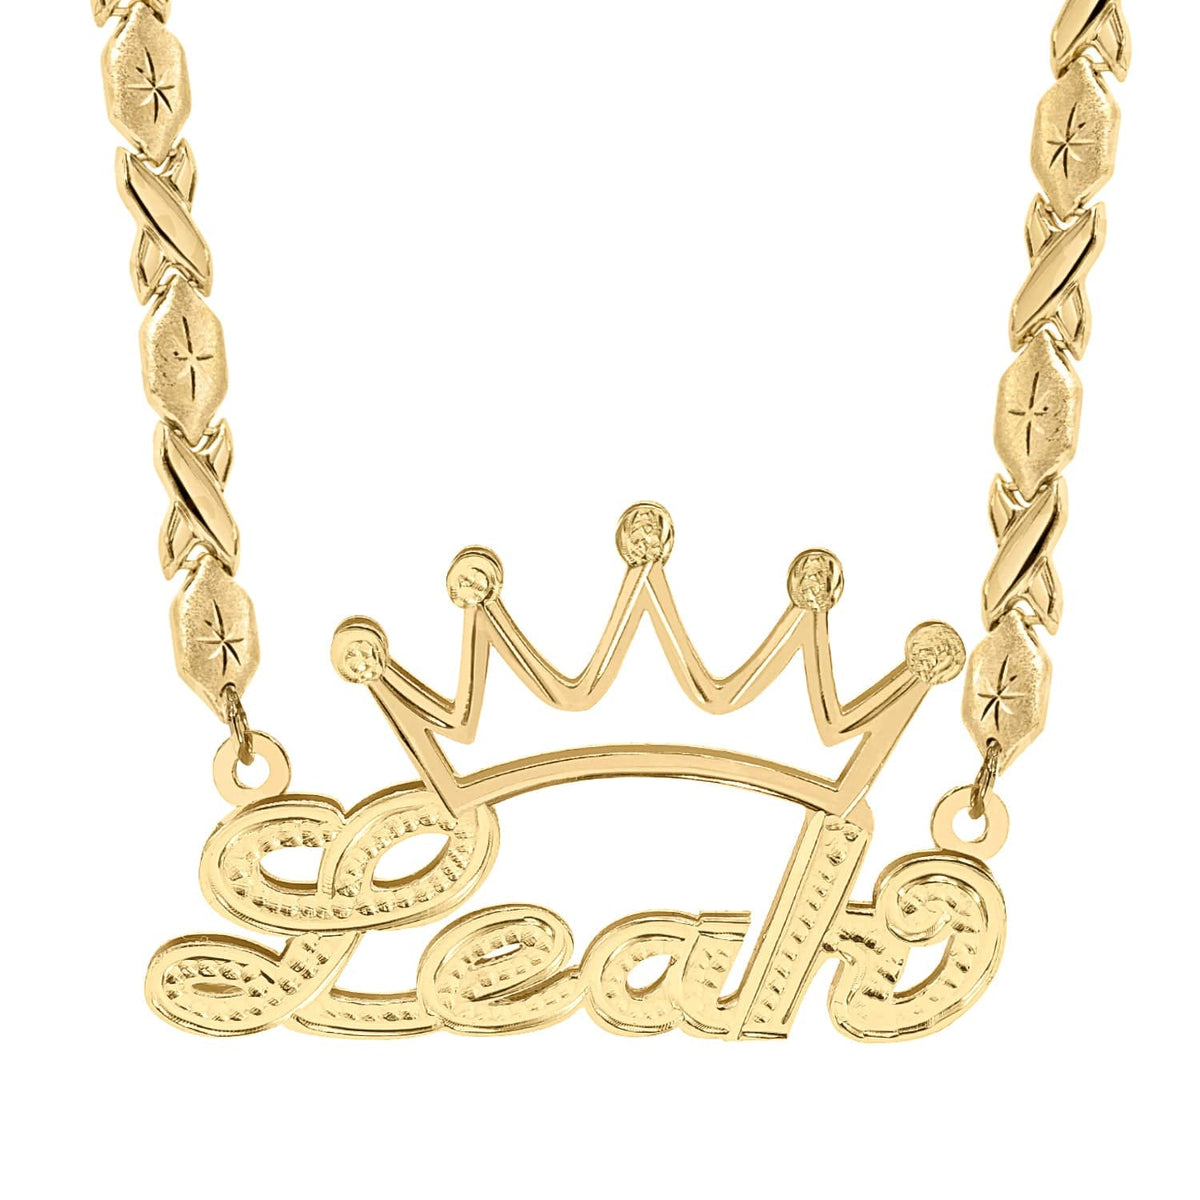 14k Gold over Sterling Silver / Xoxo Chain Personalized Double Nameplate Necklace w/ Crown